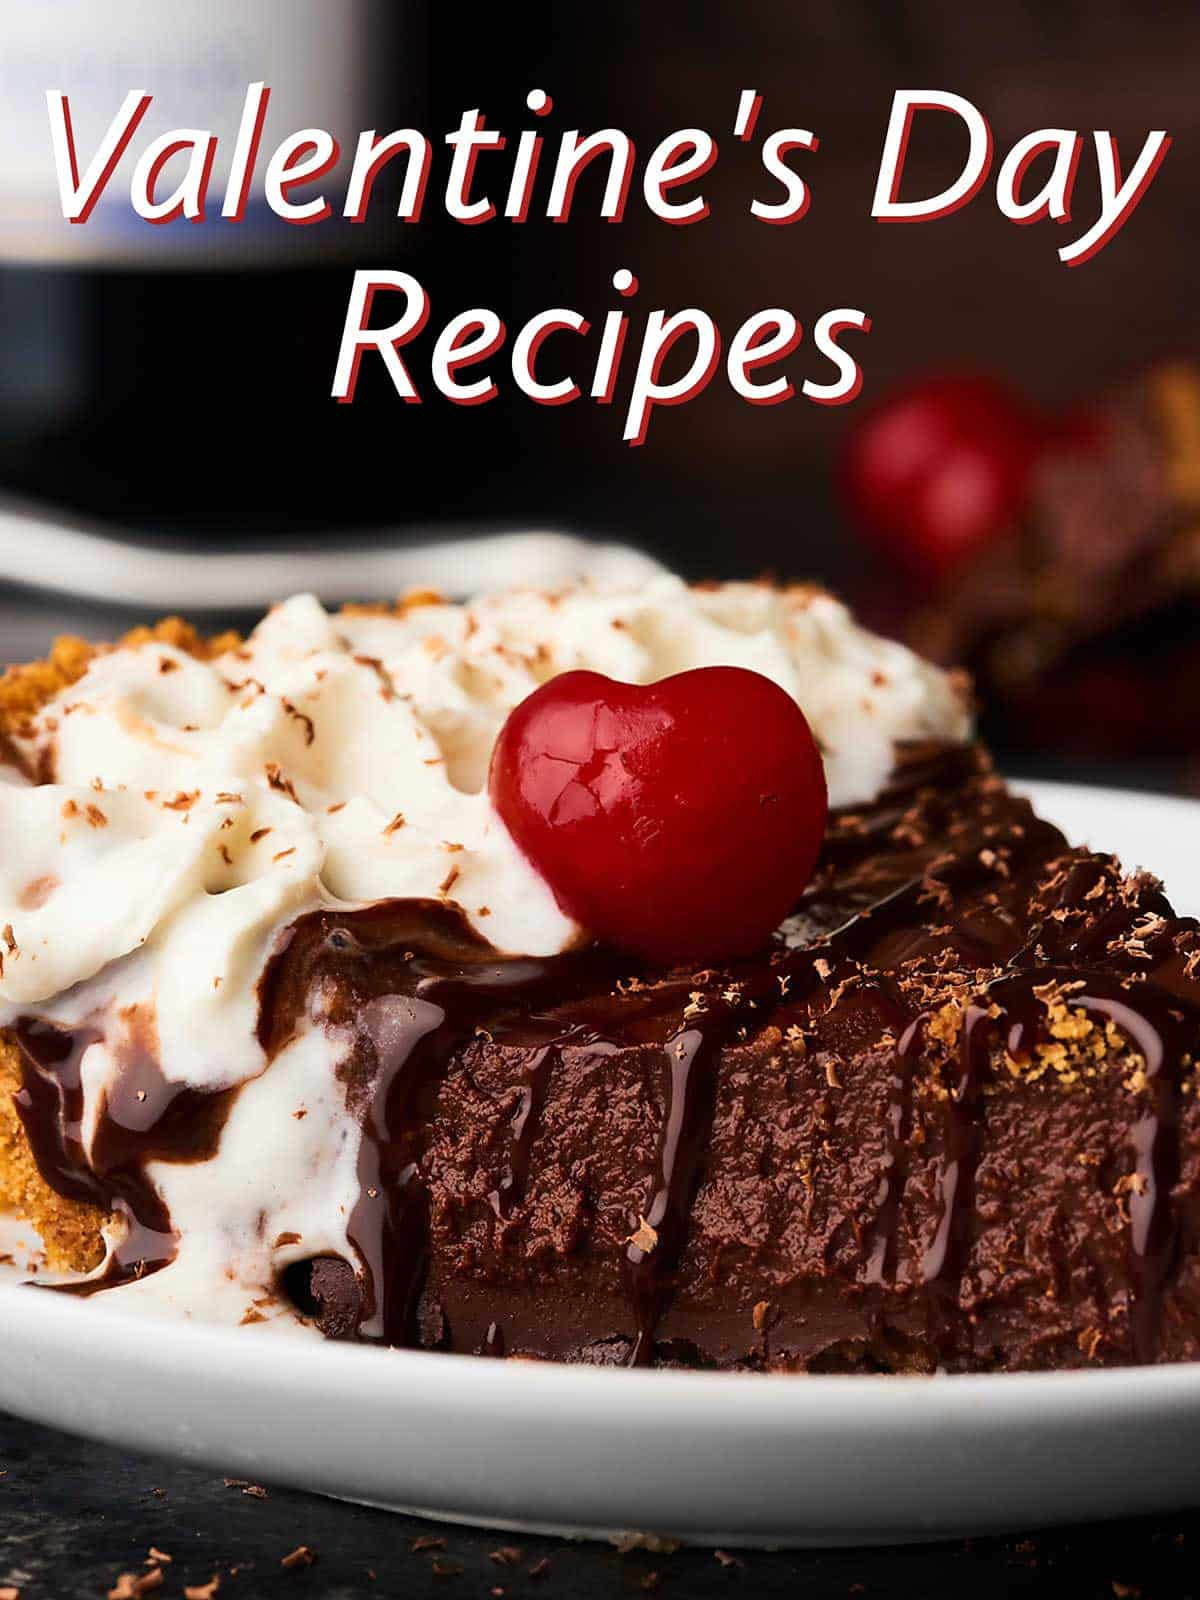 Valentines Recipes Desserts
 Easy Valentine s Day Recipes 2017 Show Me the Yummy